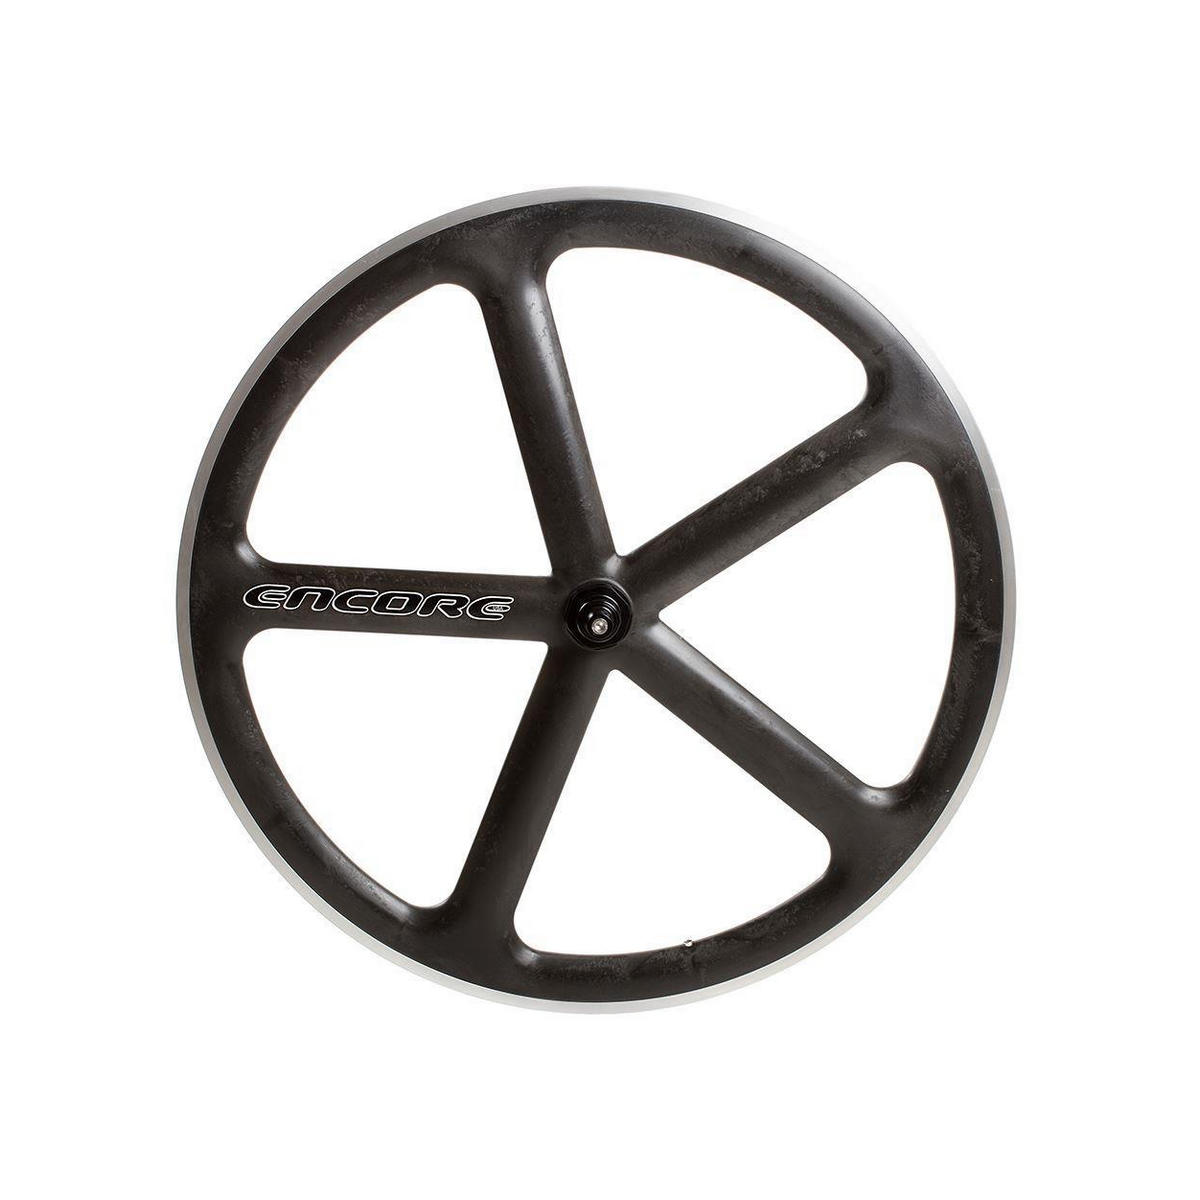 front wheel 700c track 5 spokes carbon weave natural msw